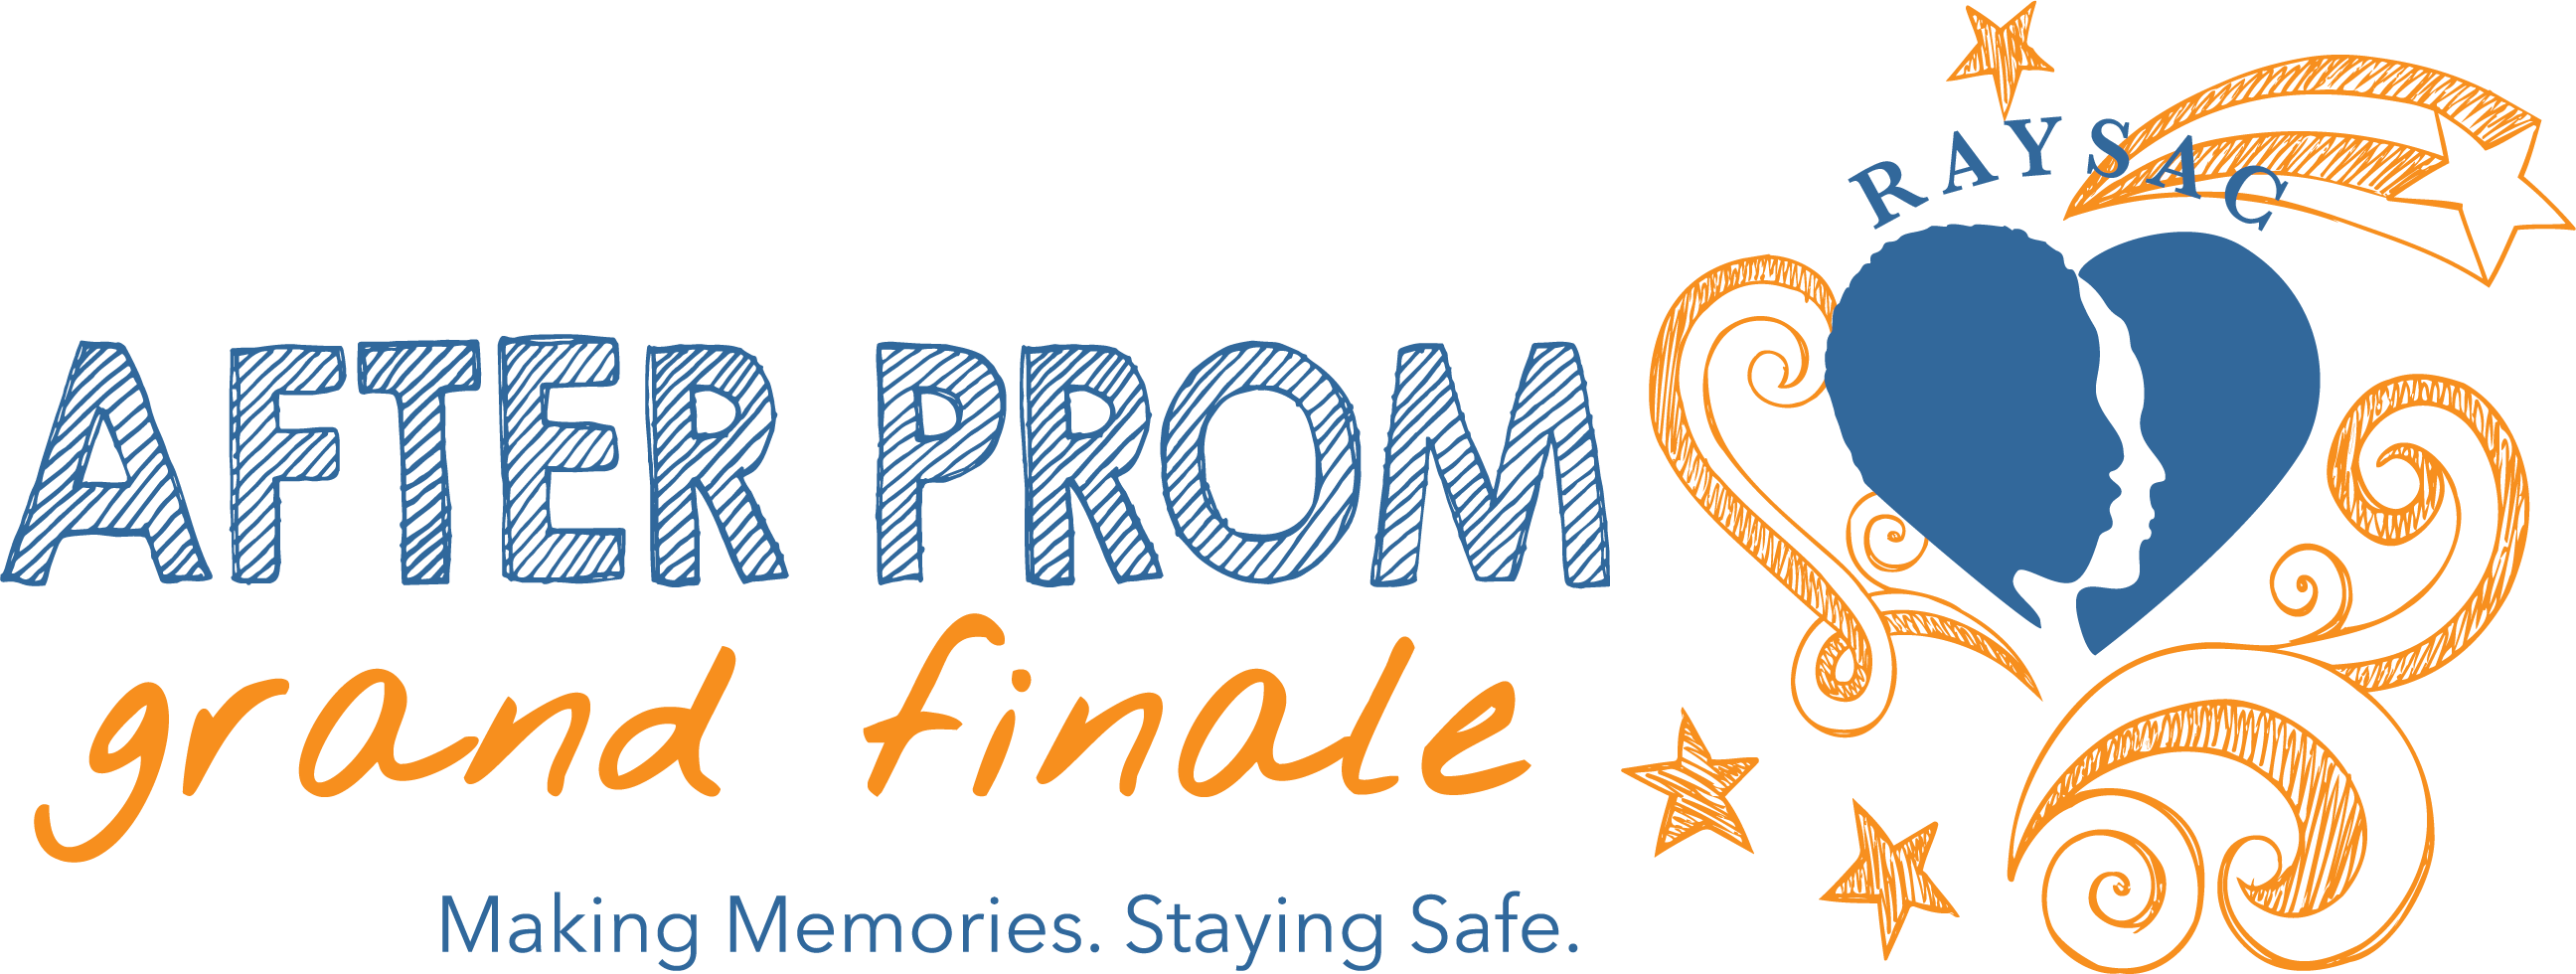 2018 After Prom Grand Finale Prom Patrol - After Prom, Transparent background PNG HD thumbnail